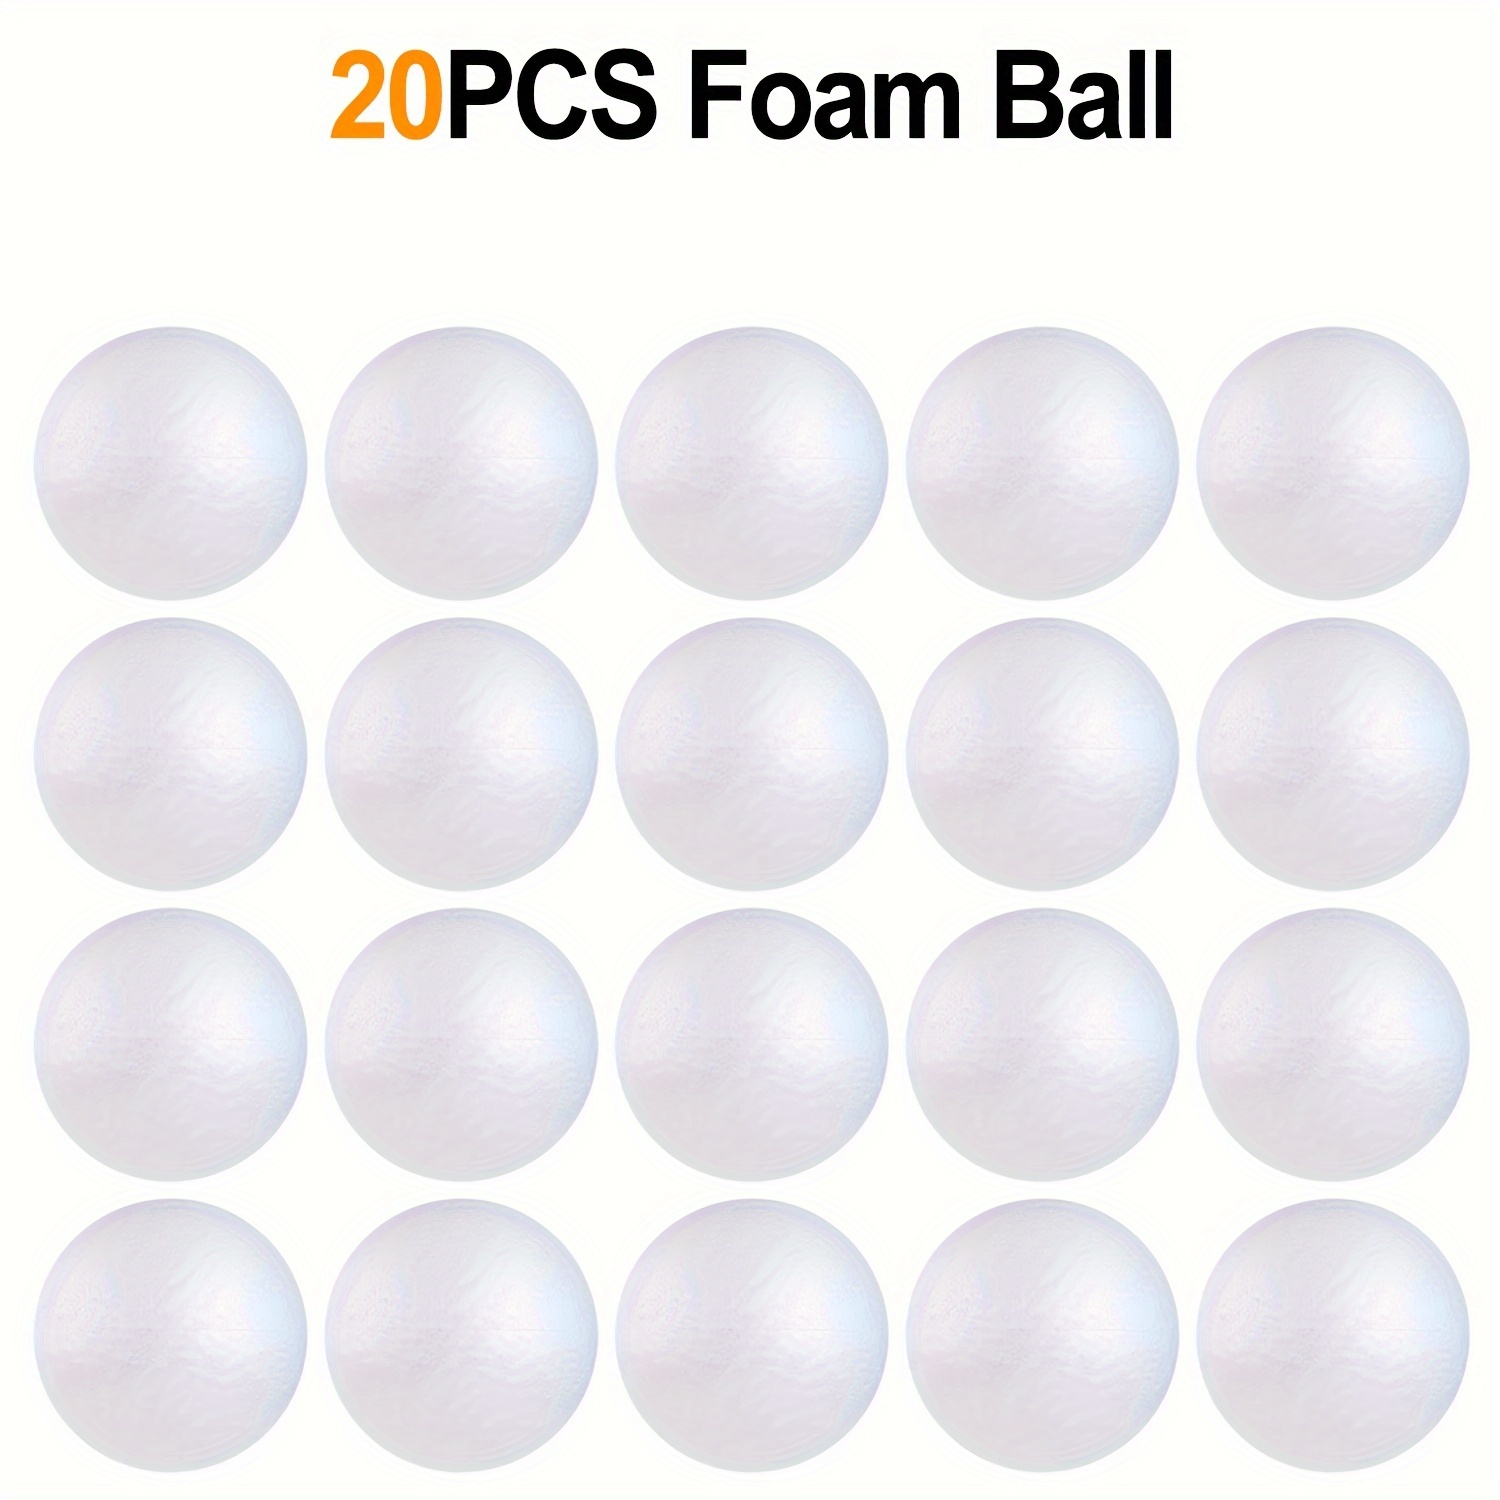  Styrofoam Balls 6 Inch,4PC Large White Foam Balls For  Crafts, DIY Craft Giant Foam Balls For Home And School,Smooth Solid Round  Balls For Arts And Craft Project Christmas